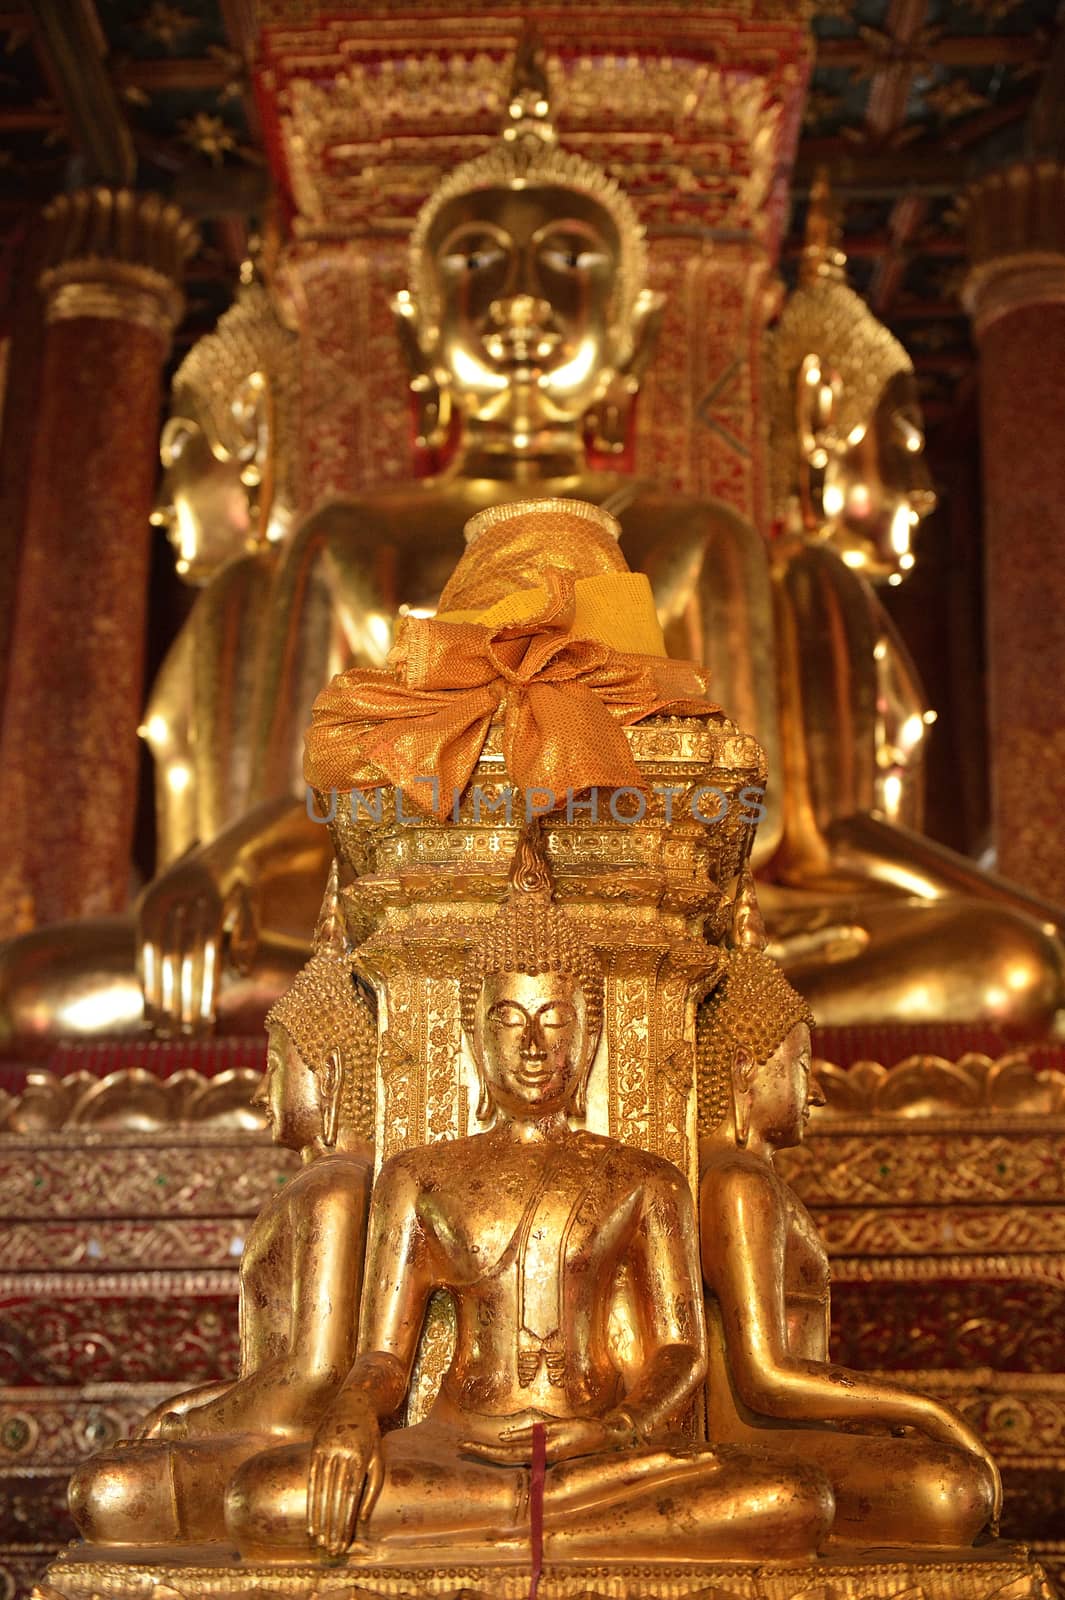 There are four small statues of Buddha in the temple Phumin Nan, Thailand